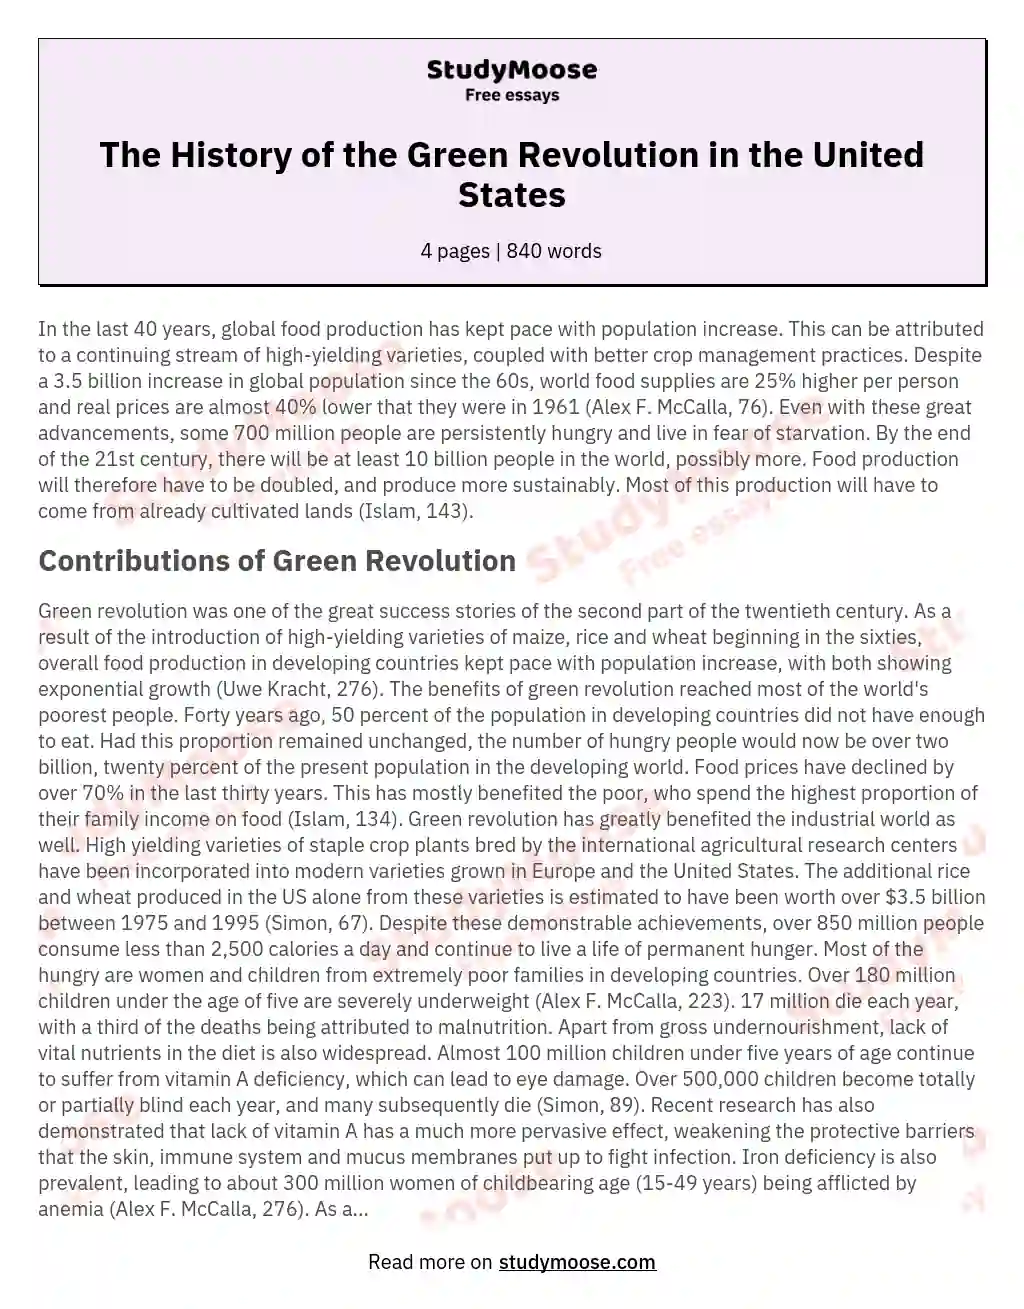 The History of the Green Revolution in the United States essay